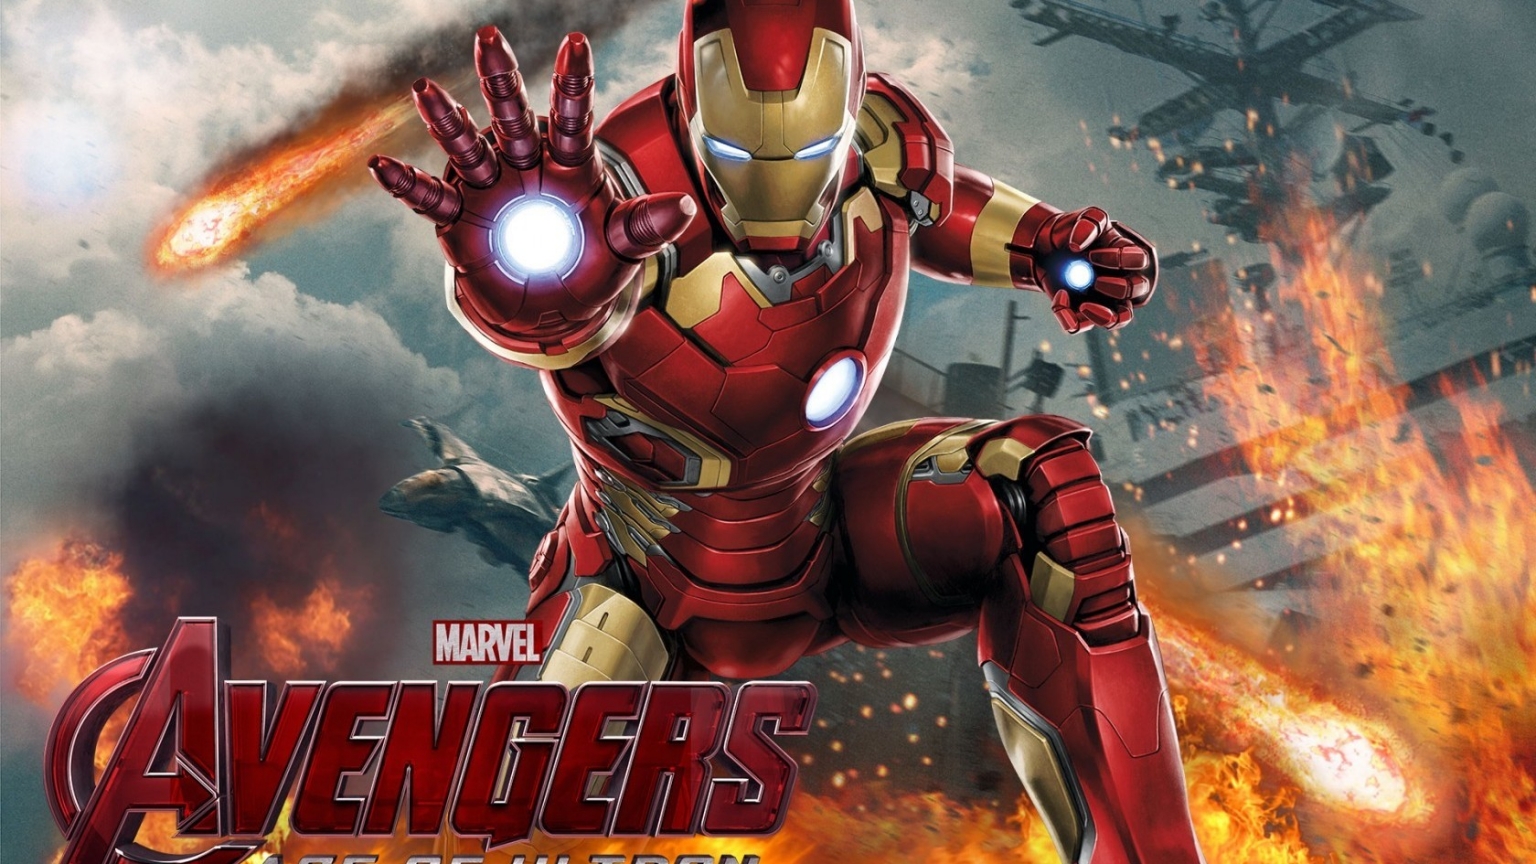 Iron Man The Avengers Movie for 1536 x 864 HDTV resolution